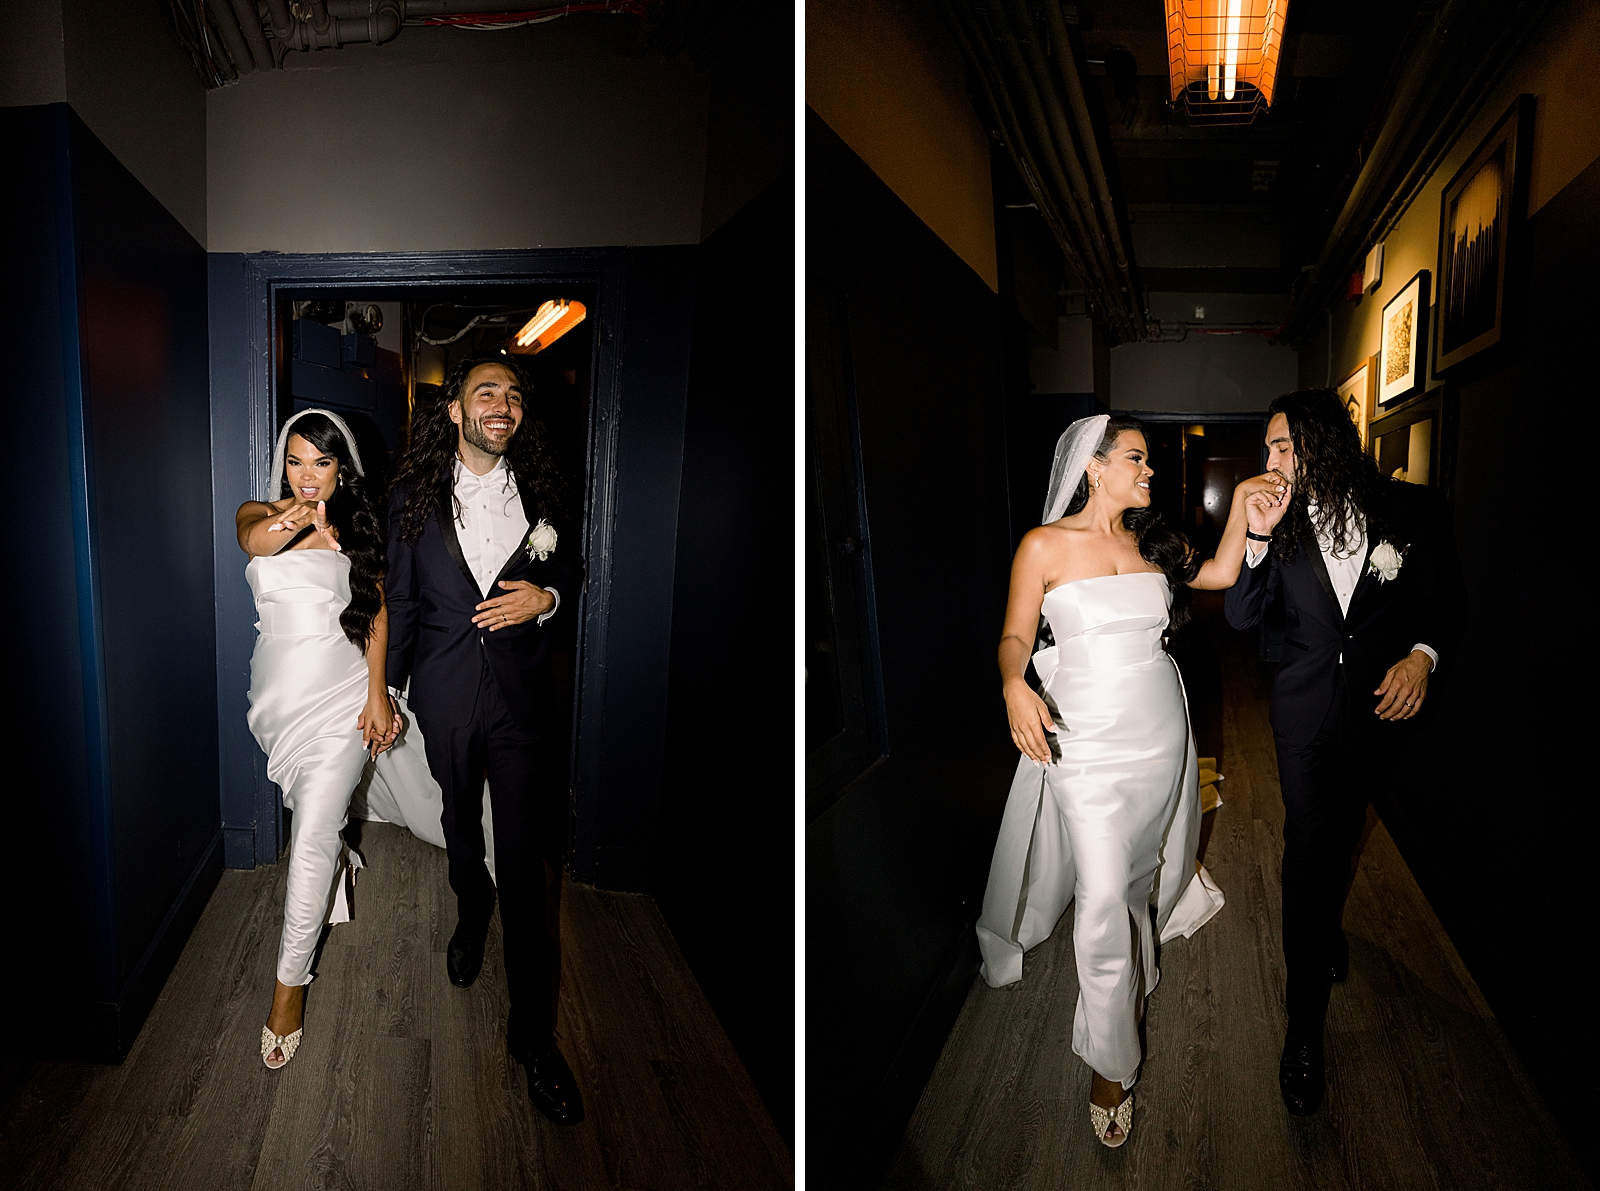 Bride and groom entering Reception area together and Groom kissing her Bride's hand